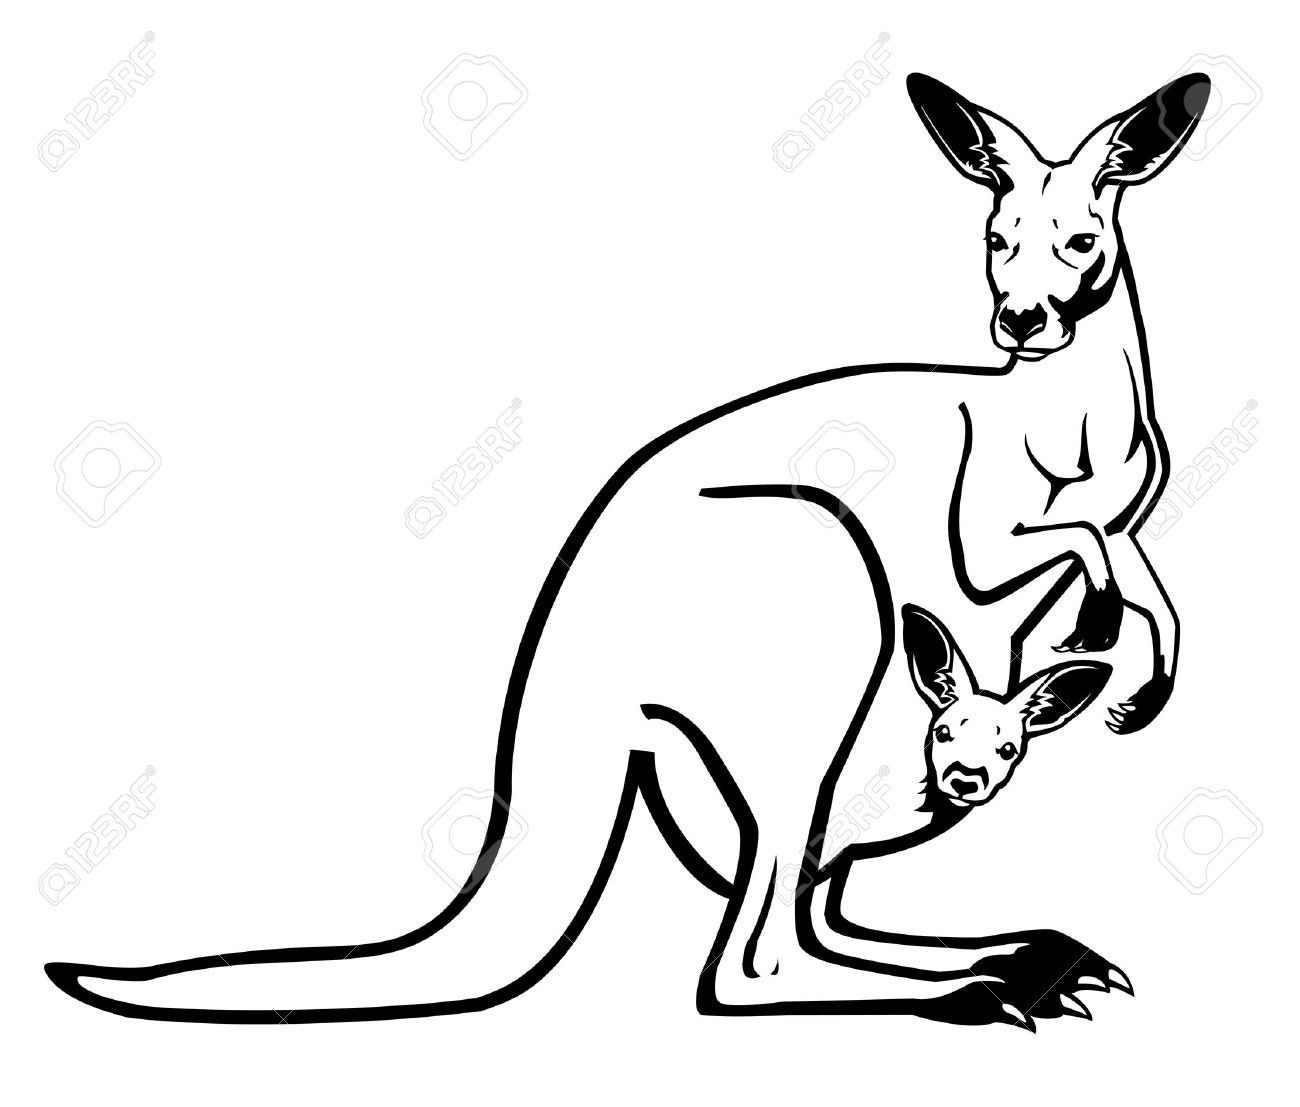 Free download best . Kangaroo clipart black and white